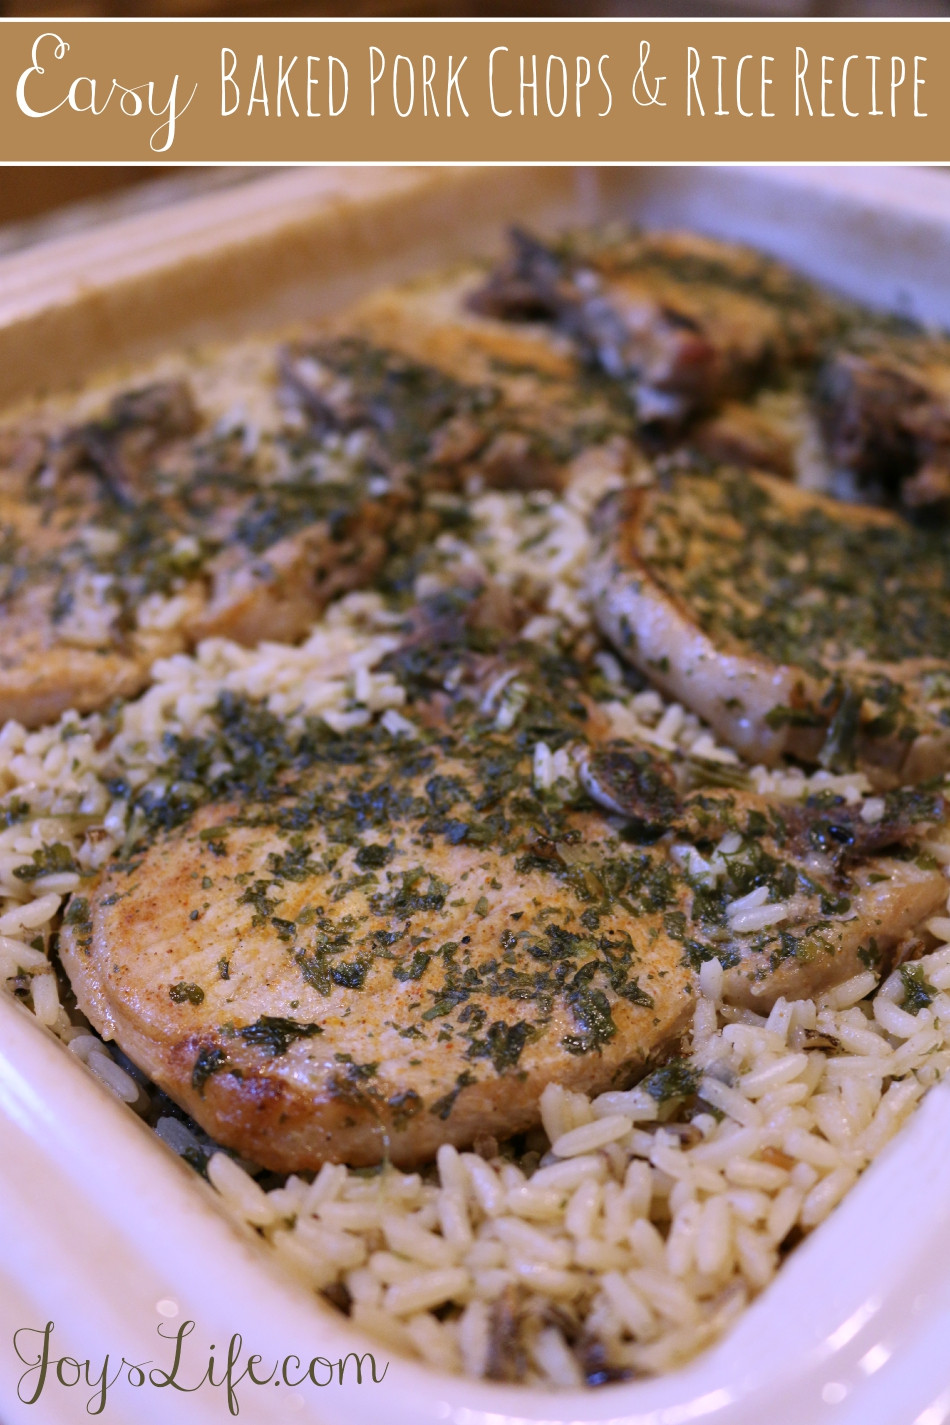 Recipe For Baked Pork Chops
 Easy Baked Pork Chops and Rice Recipe